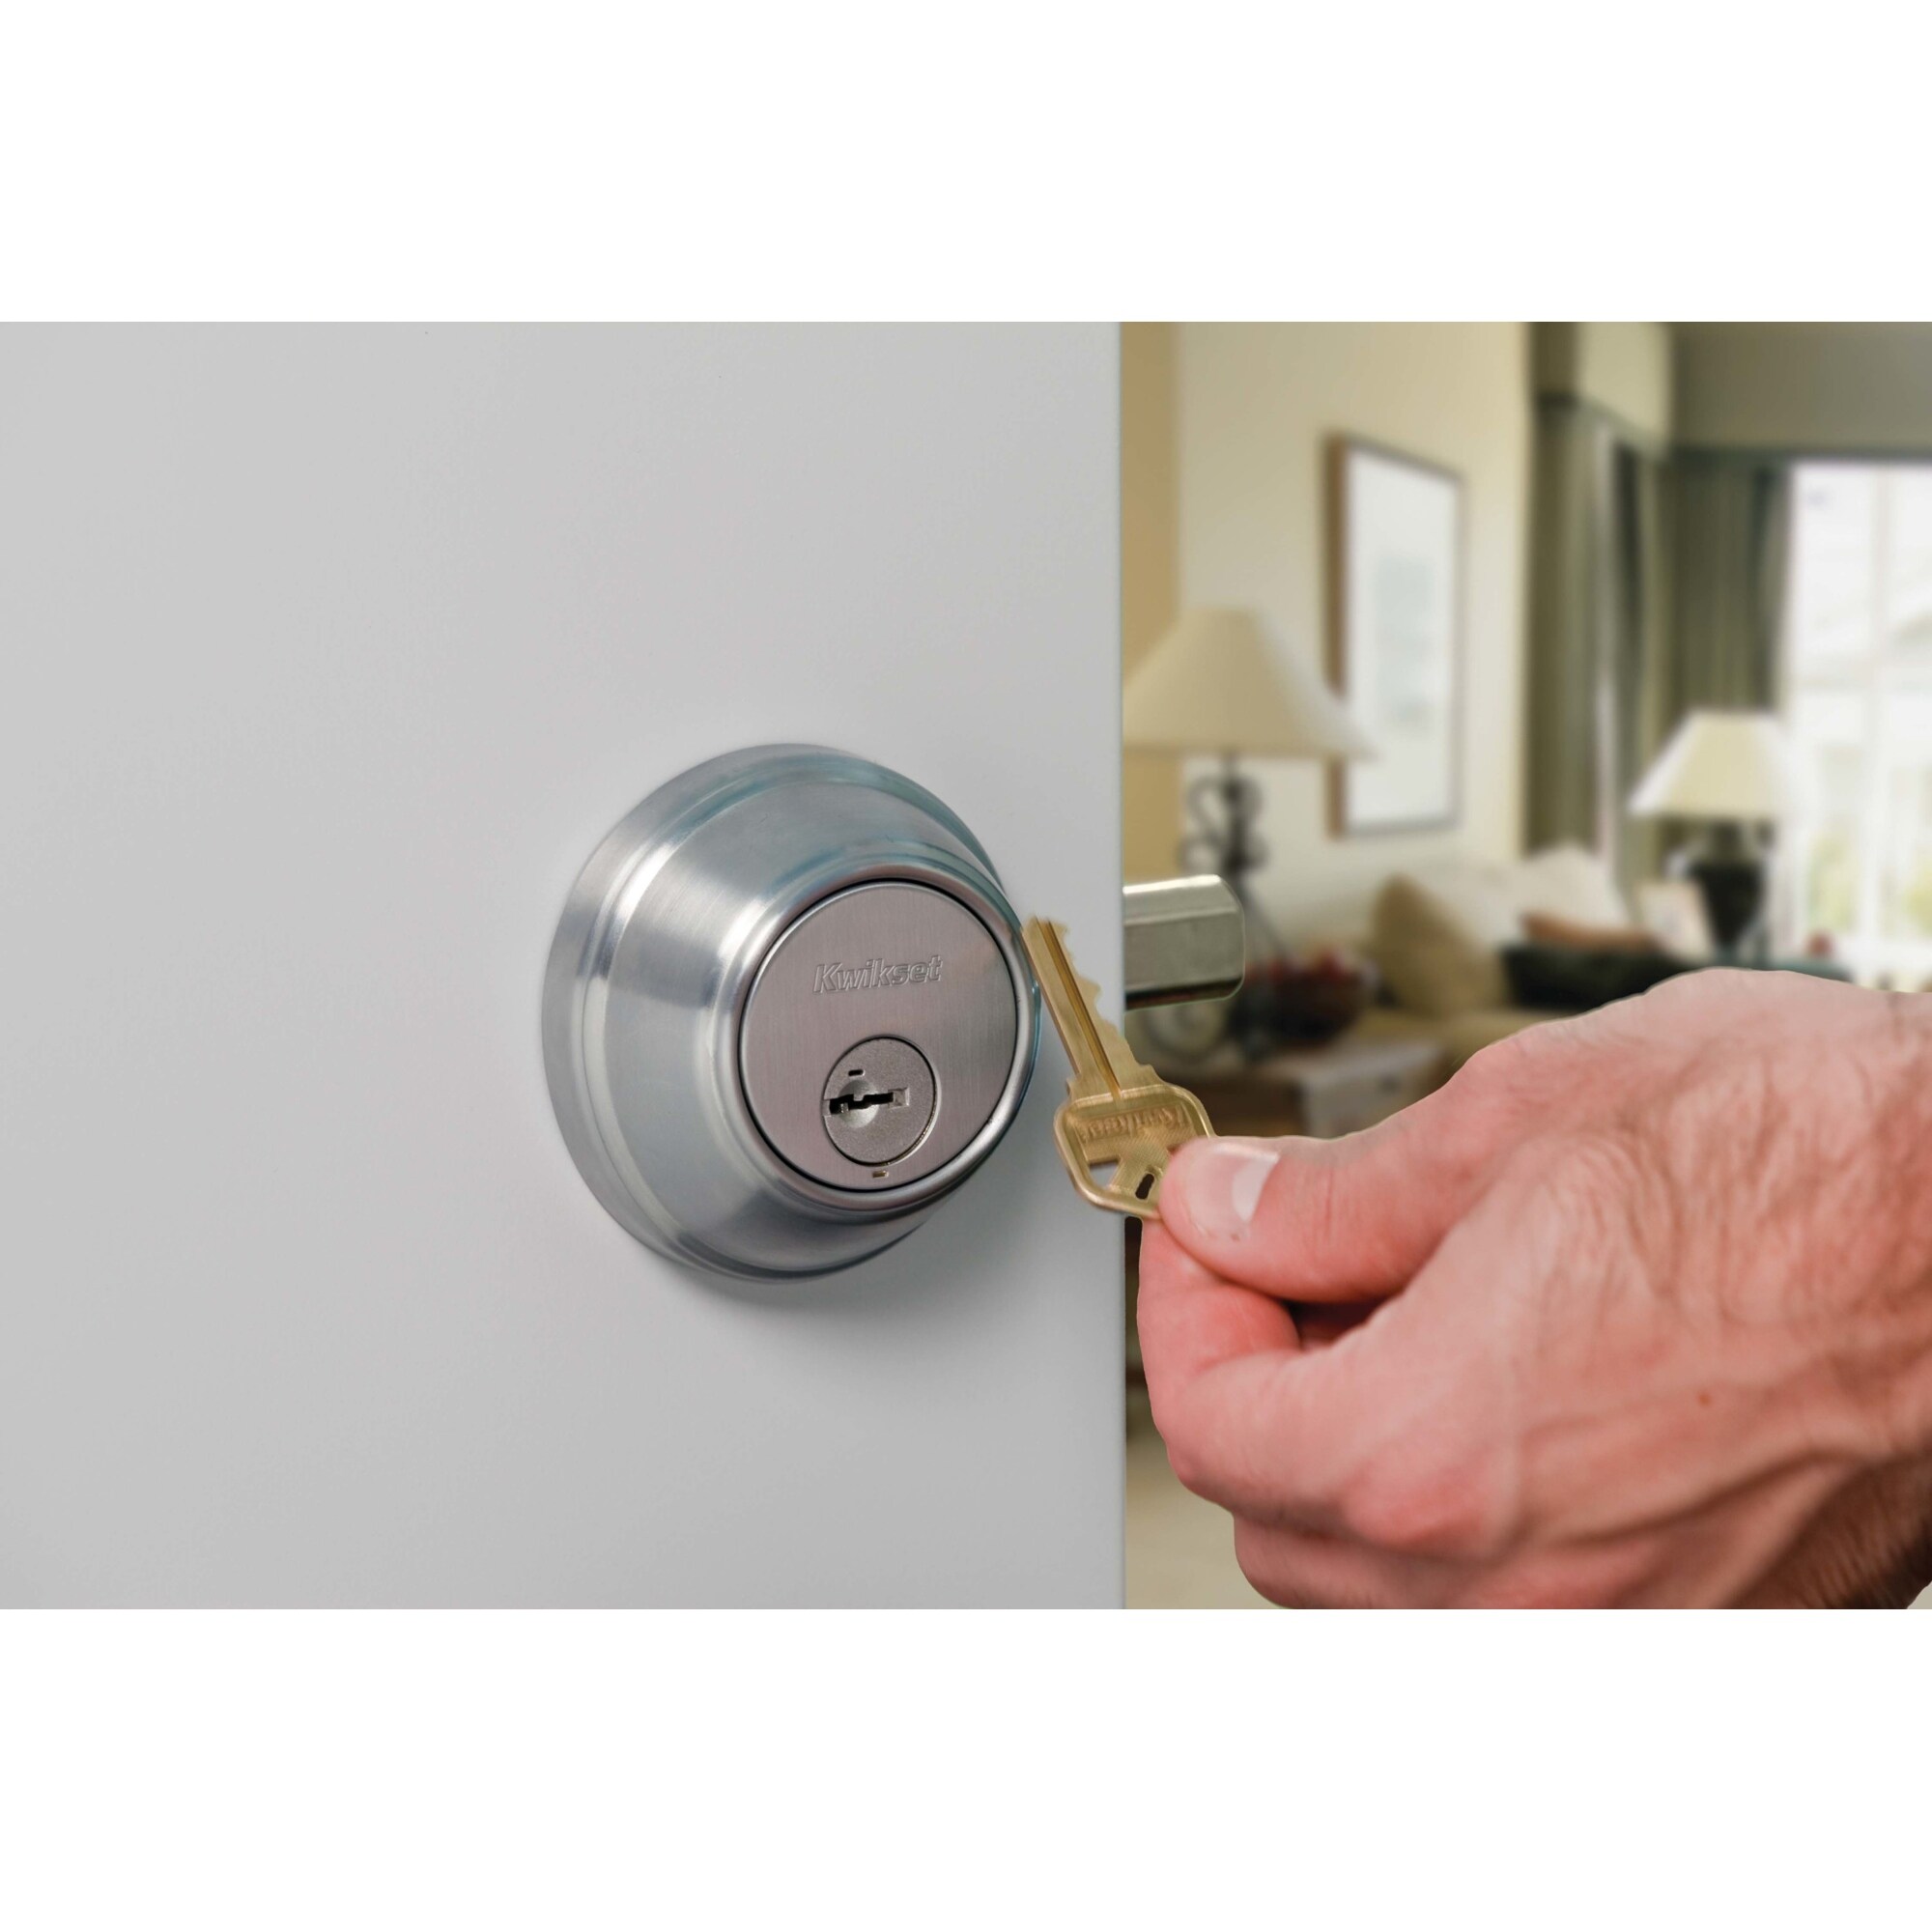 Kwikset Single Cylinder Deadbolt with SmartKey from the 780 Series Bed  Bath  Beyond 16114129